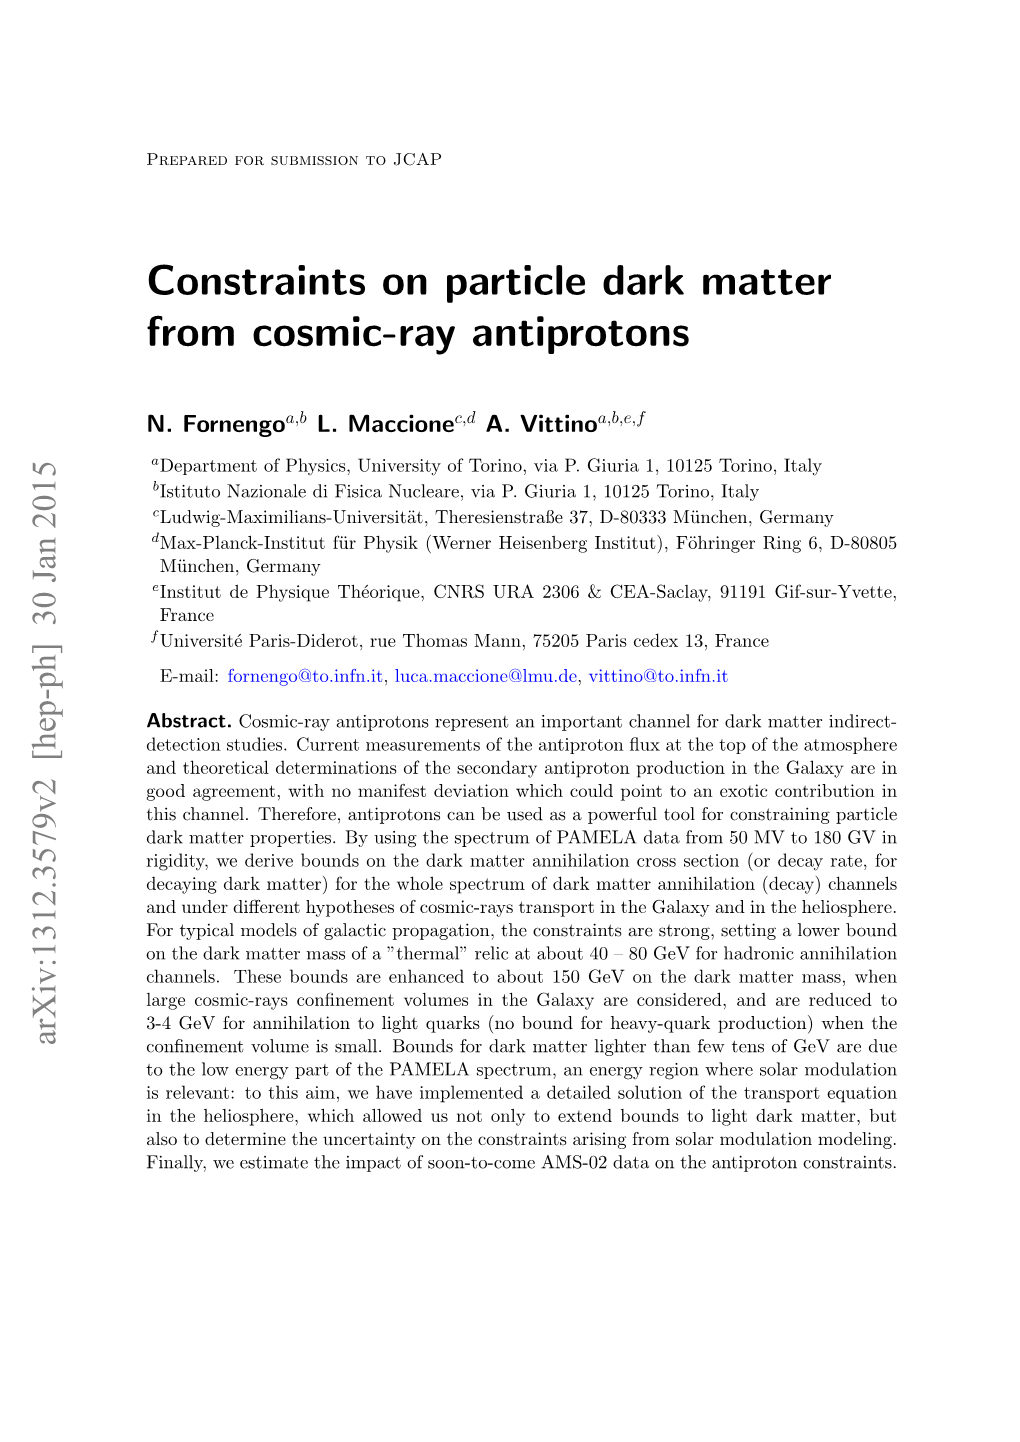 Constraints on Particle Dark Matter from Cosmic-Ray Antiprotons